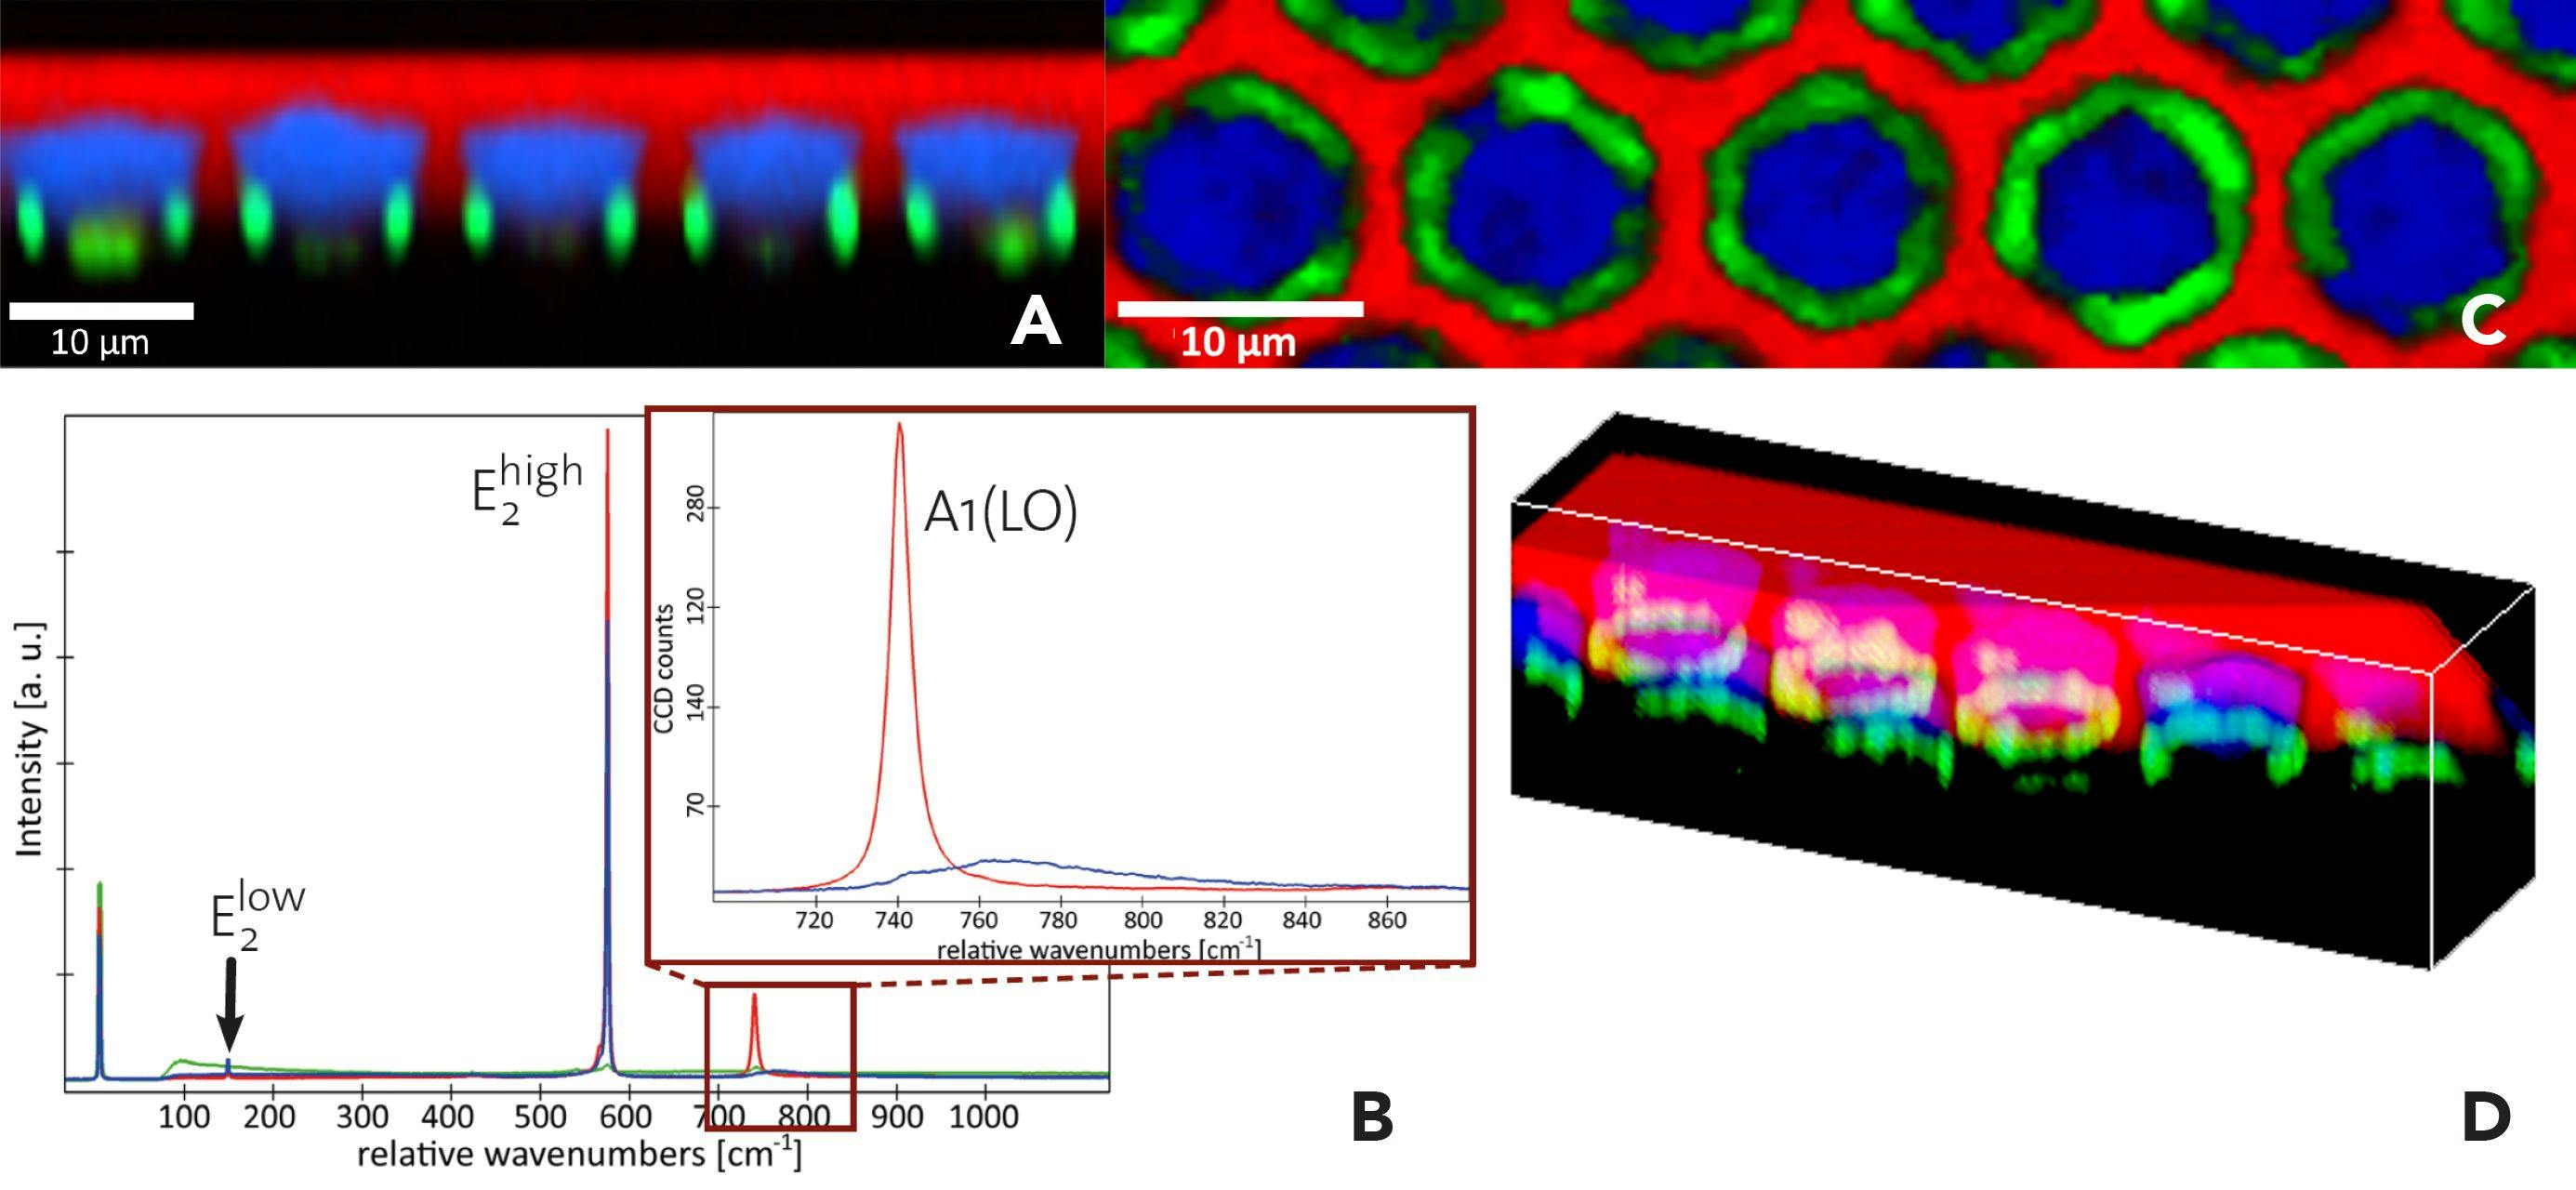 Figure 1: 3D Raman analysis of a GaN crystal grown on a patterned sapphire substrate. A: Depth scan (240 x 80 pixels on an area of 60 x 20 µm2) along the red line in Figure 1. B: Corresponding Raman spectra. In the inset, the green spectrum is omitted for clarity. C, D: 3D Raman image of the sample volume (180 x 45 x 20 pixels in a volume of 60 x 15 x 20 µm2). At the front right corner, a part of the structure is removed.